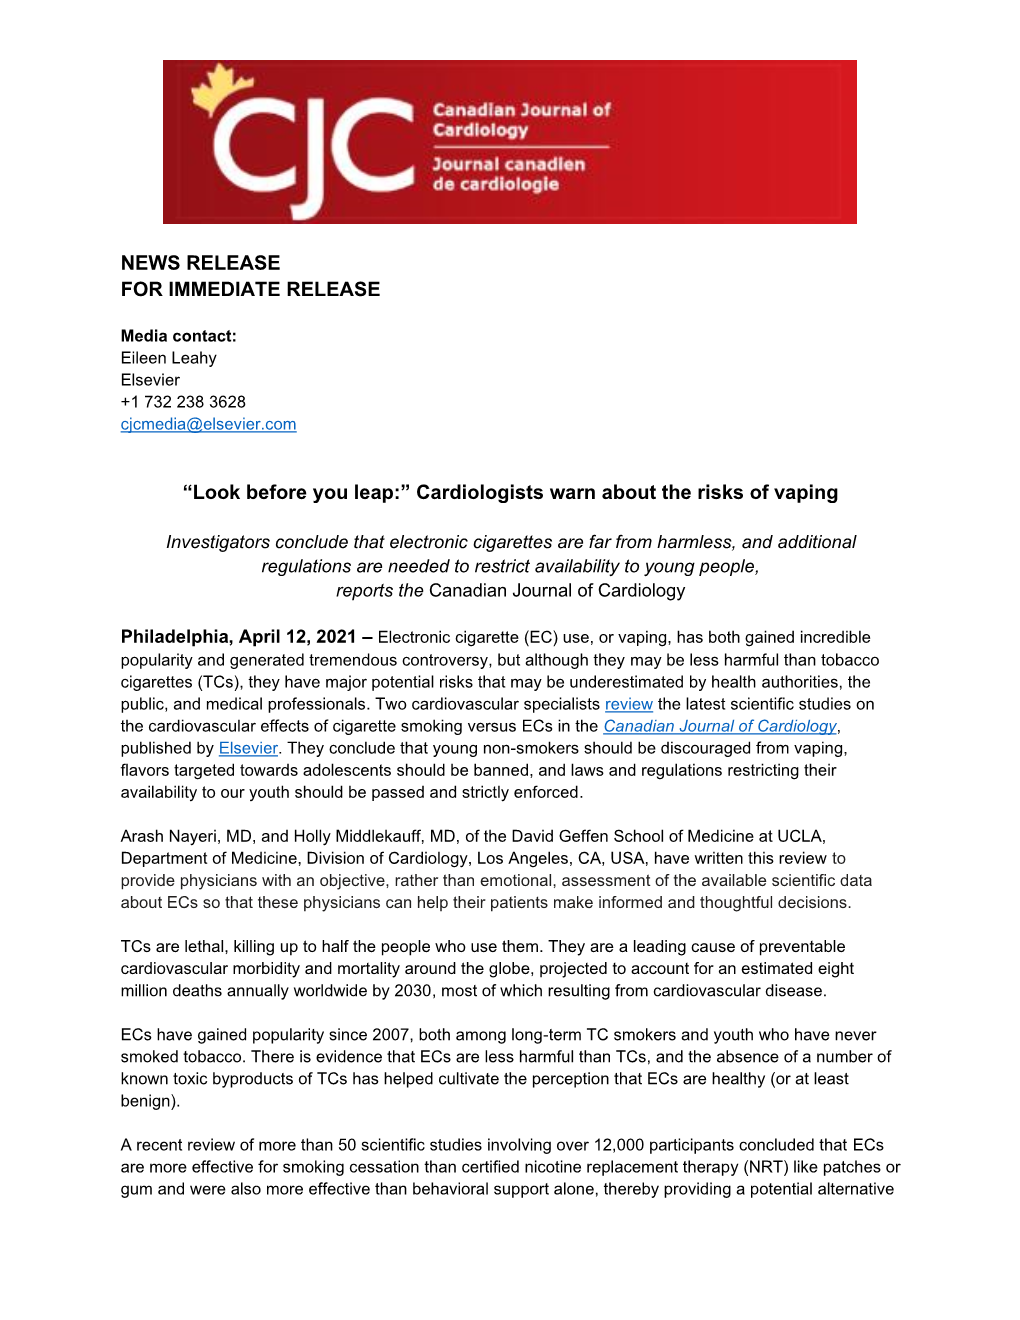 NEWS RELEASE for IMMEDIATE RELEASE “Look Before You Leap:” Cardiologists Warn About the Risks of Vaping